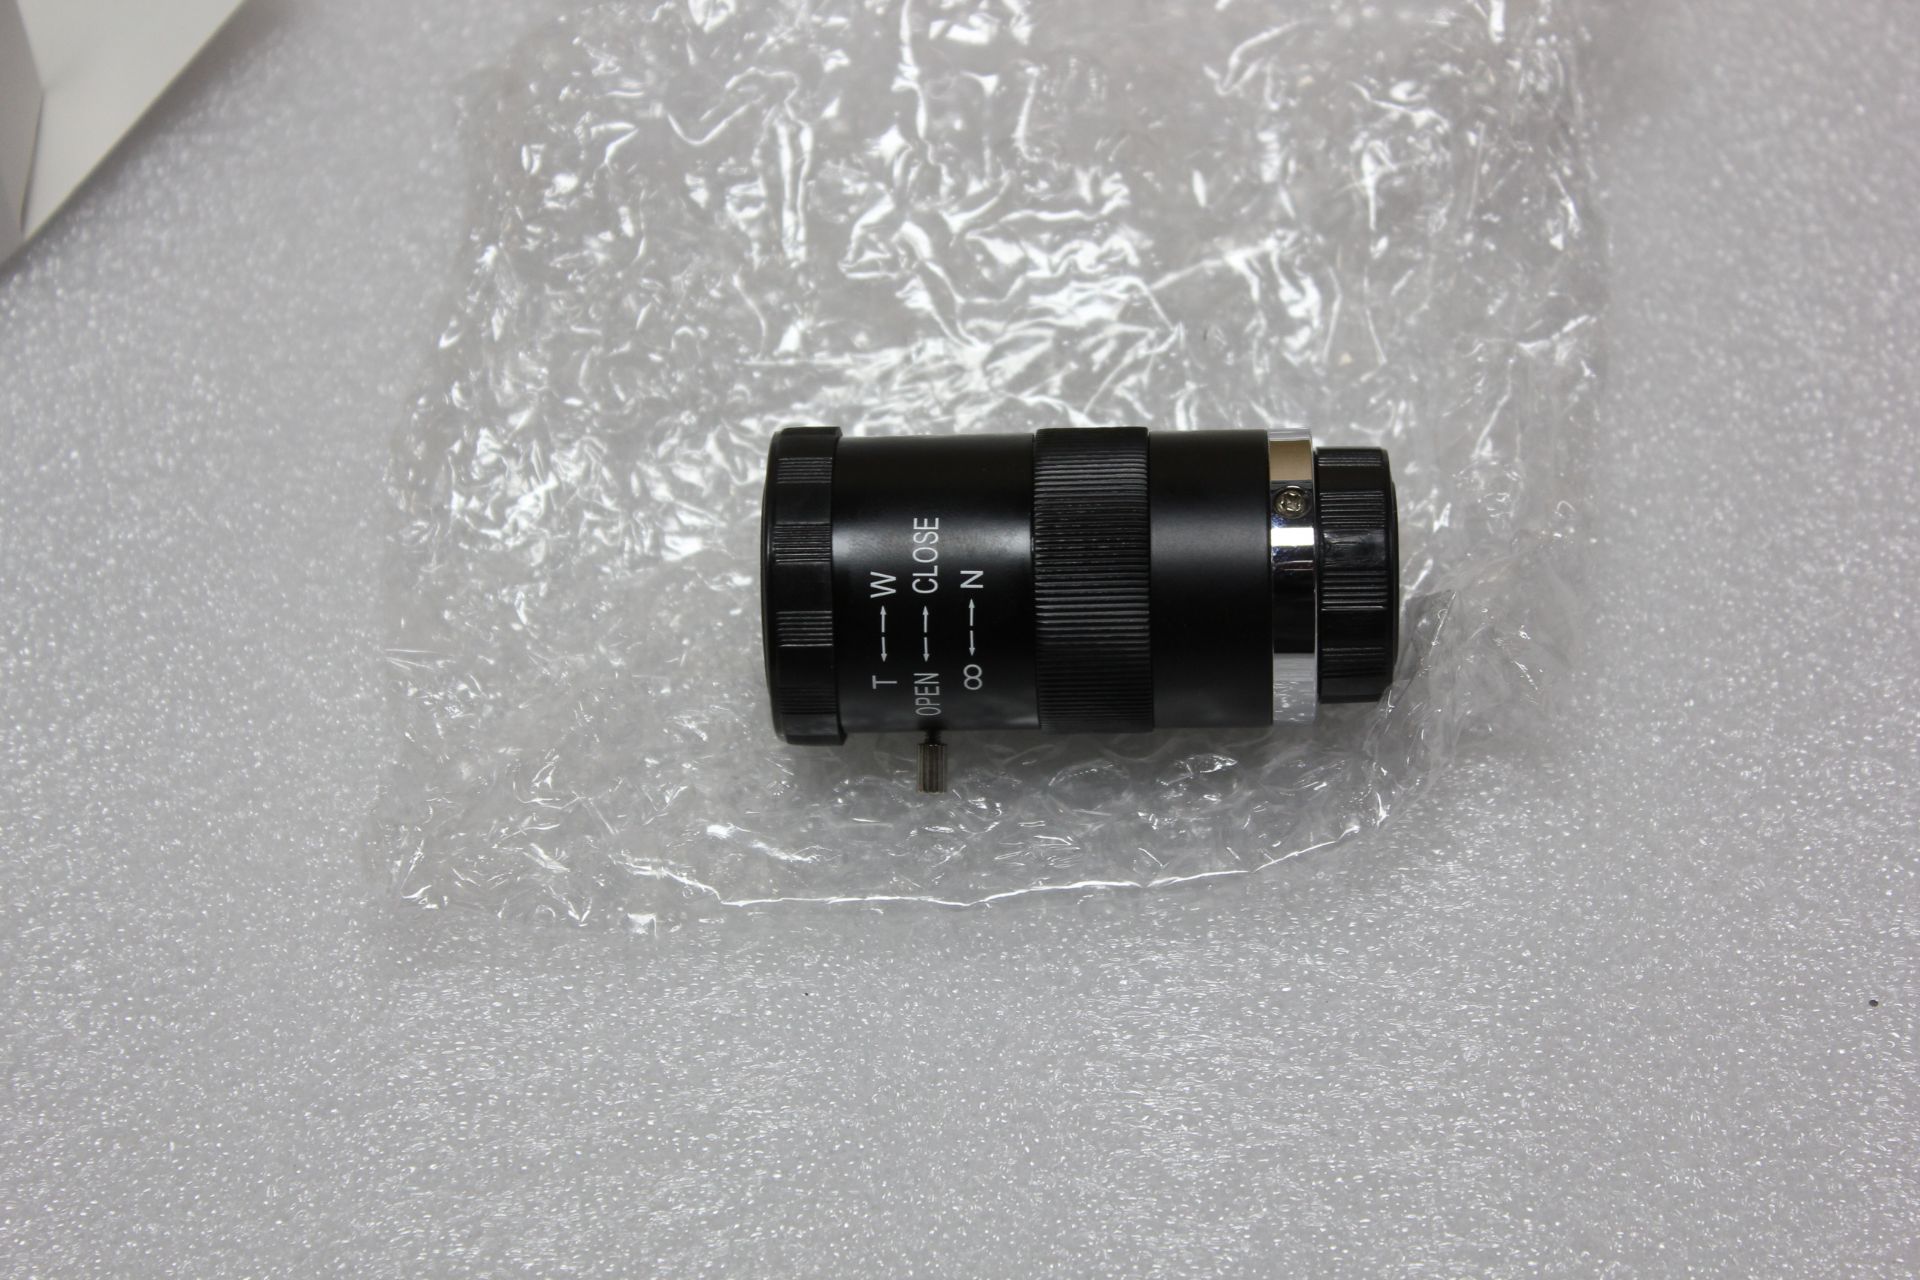 LOT OF NEW MACHINE VISION CAMERA LENSES - Image 3 of 6